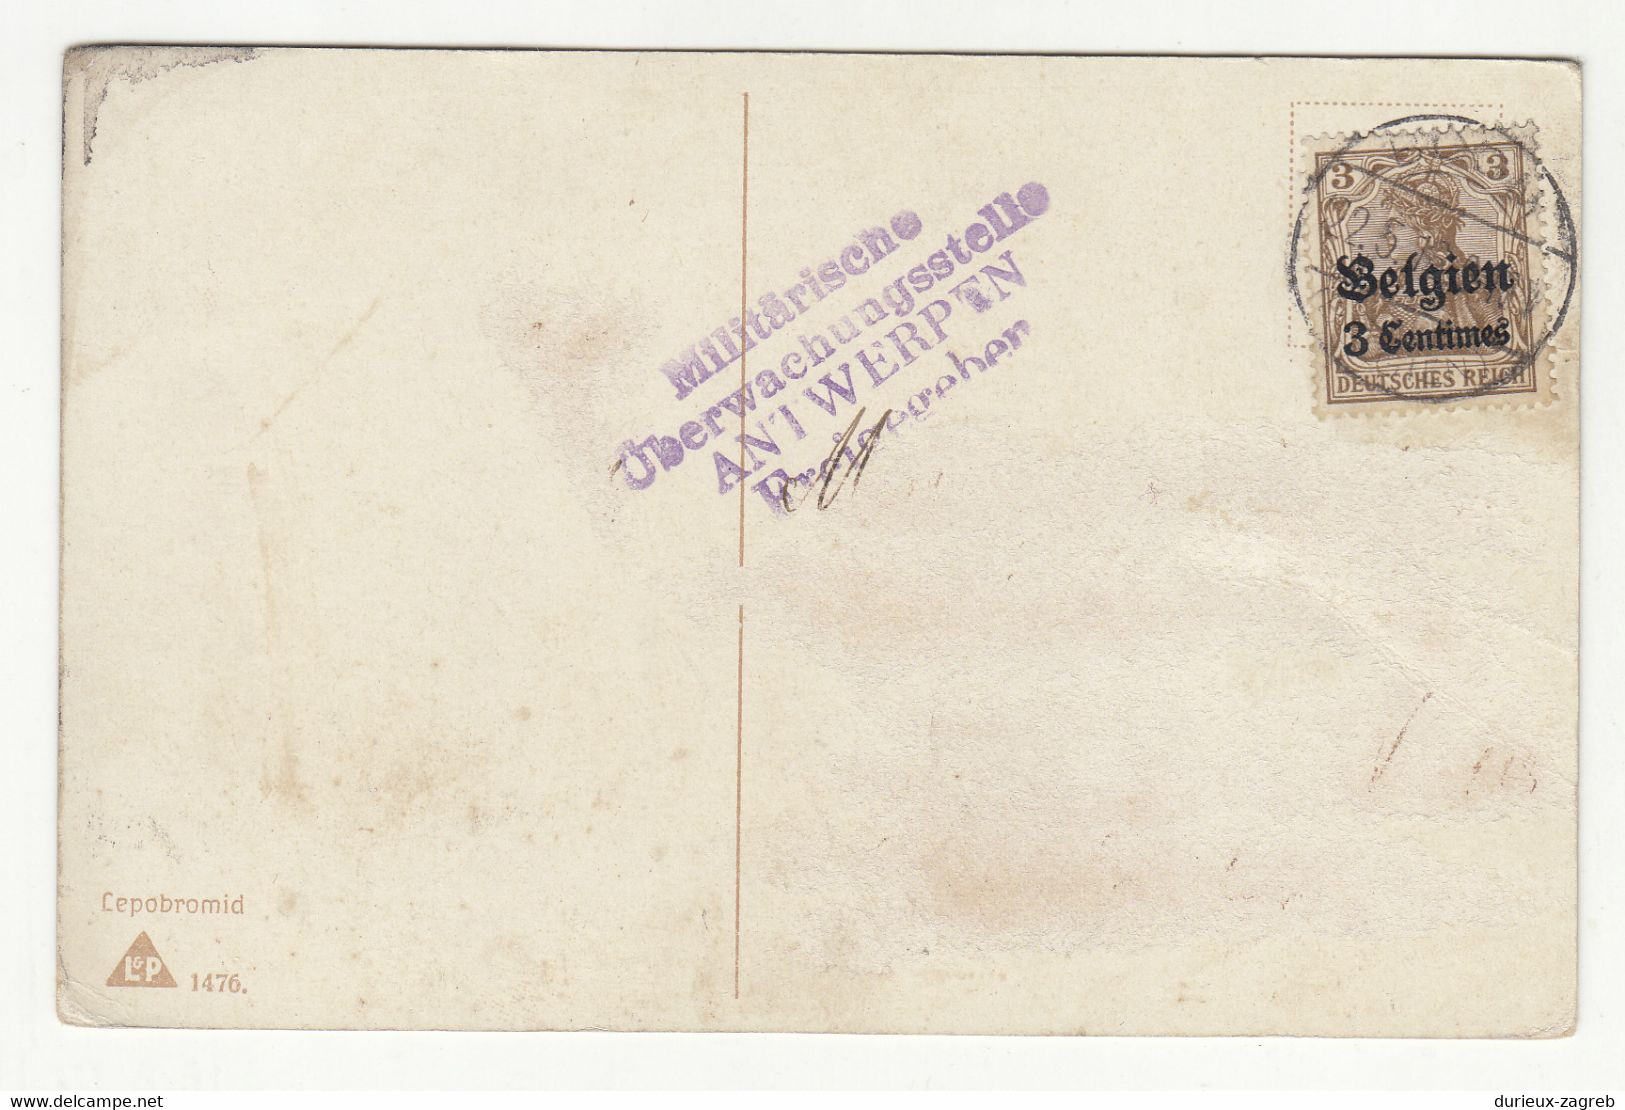 Germany WWI Belgium Occupation - 1 Postcard, 1 Letter Cover And 2 Letter Cover Cutouts B211015 - Besetzungen 1914-18